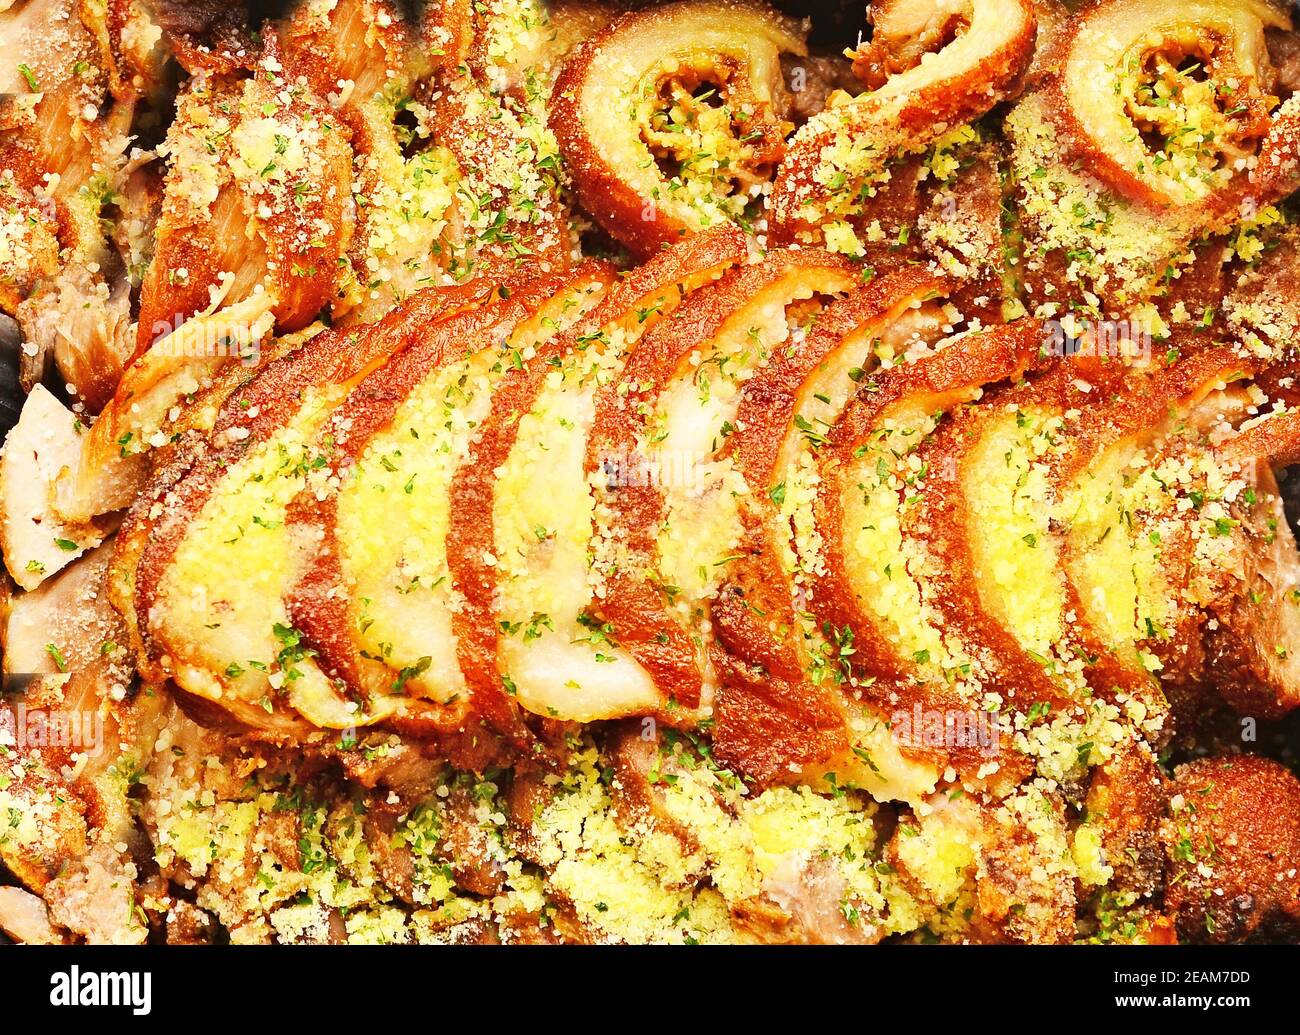 Tasty foods - trotters, slice of leg of pig - Koreans enjoy trotters with family or friends time to time Stock Photo